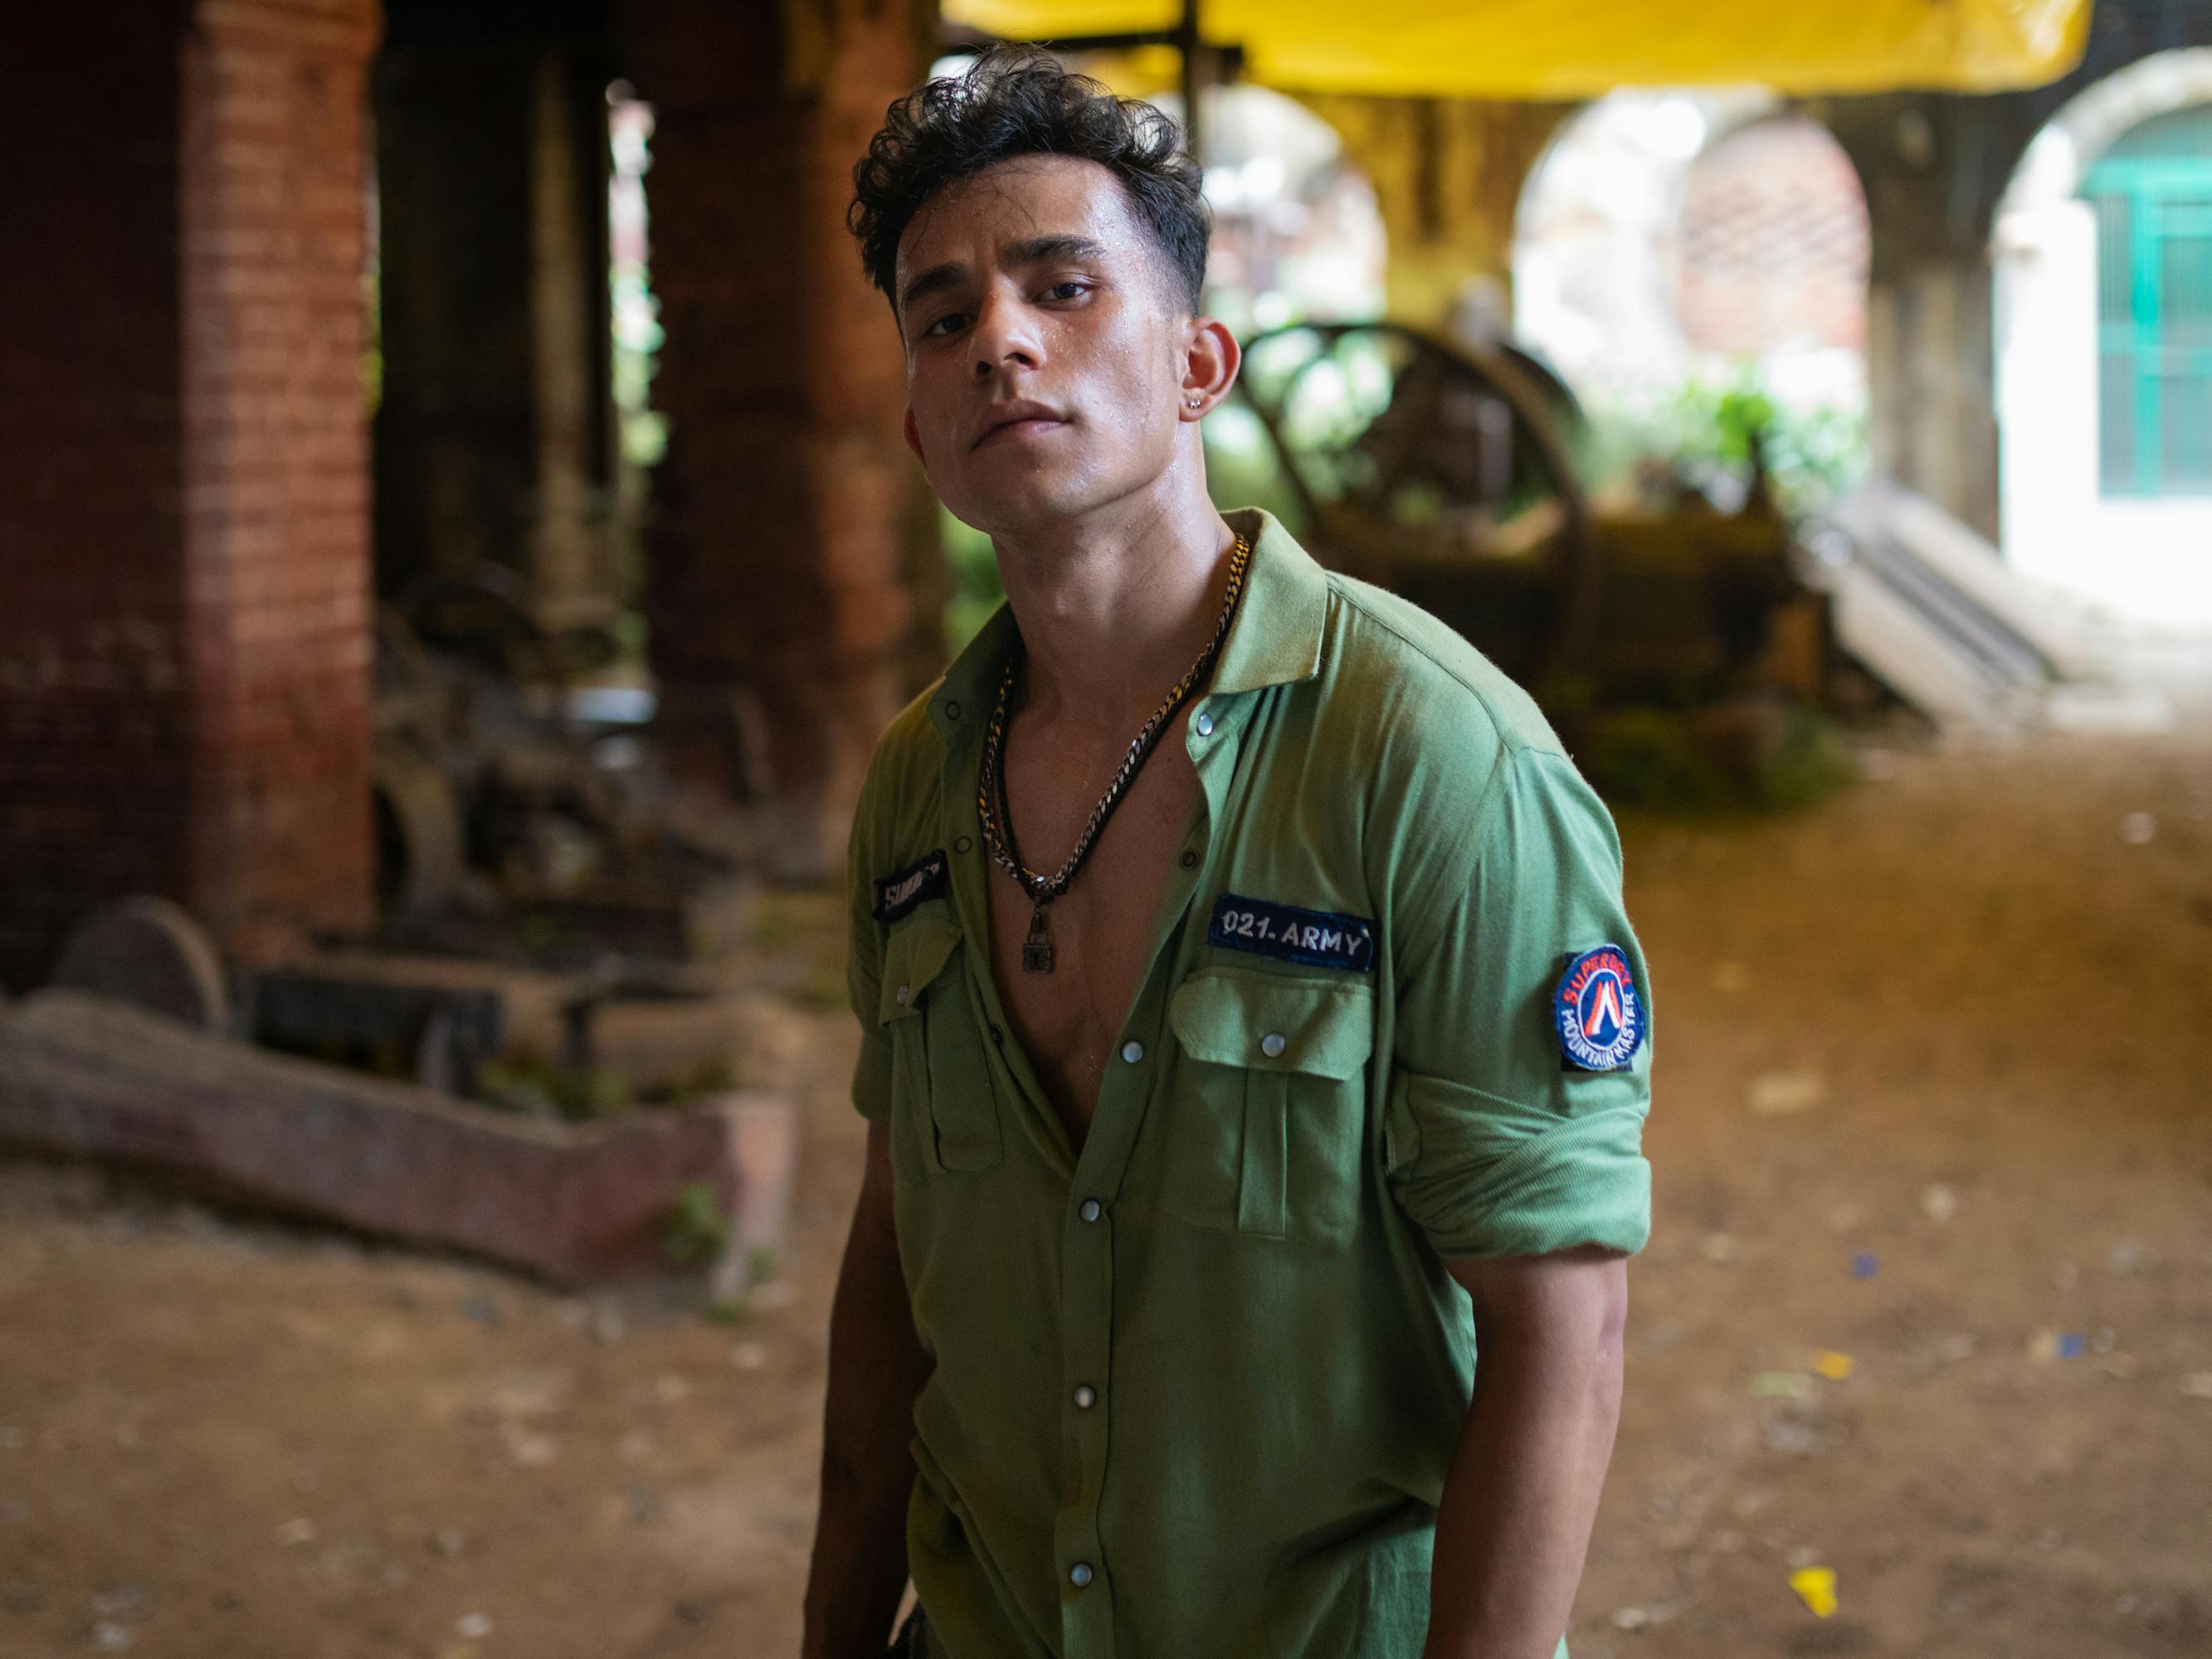 Balli (Cwaayal Sing) wears a mostly unbuttoned green shirt with patches and a dark necklace. 